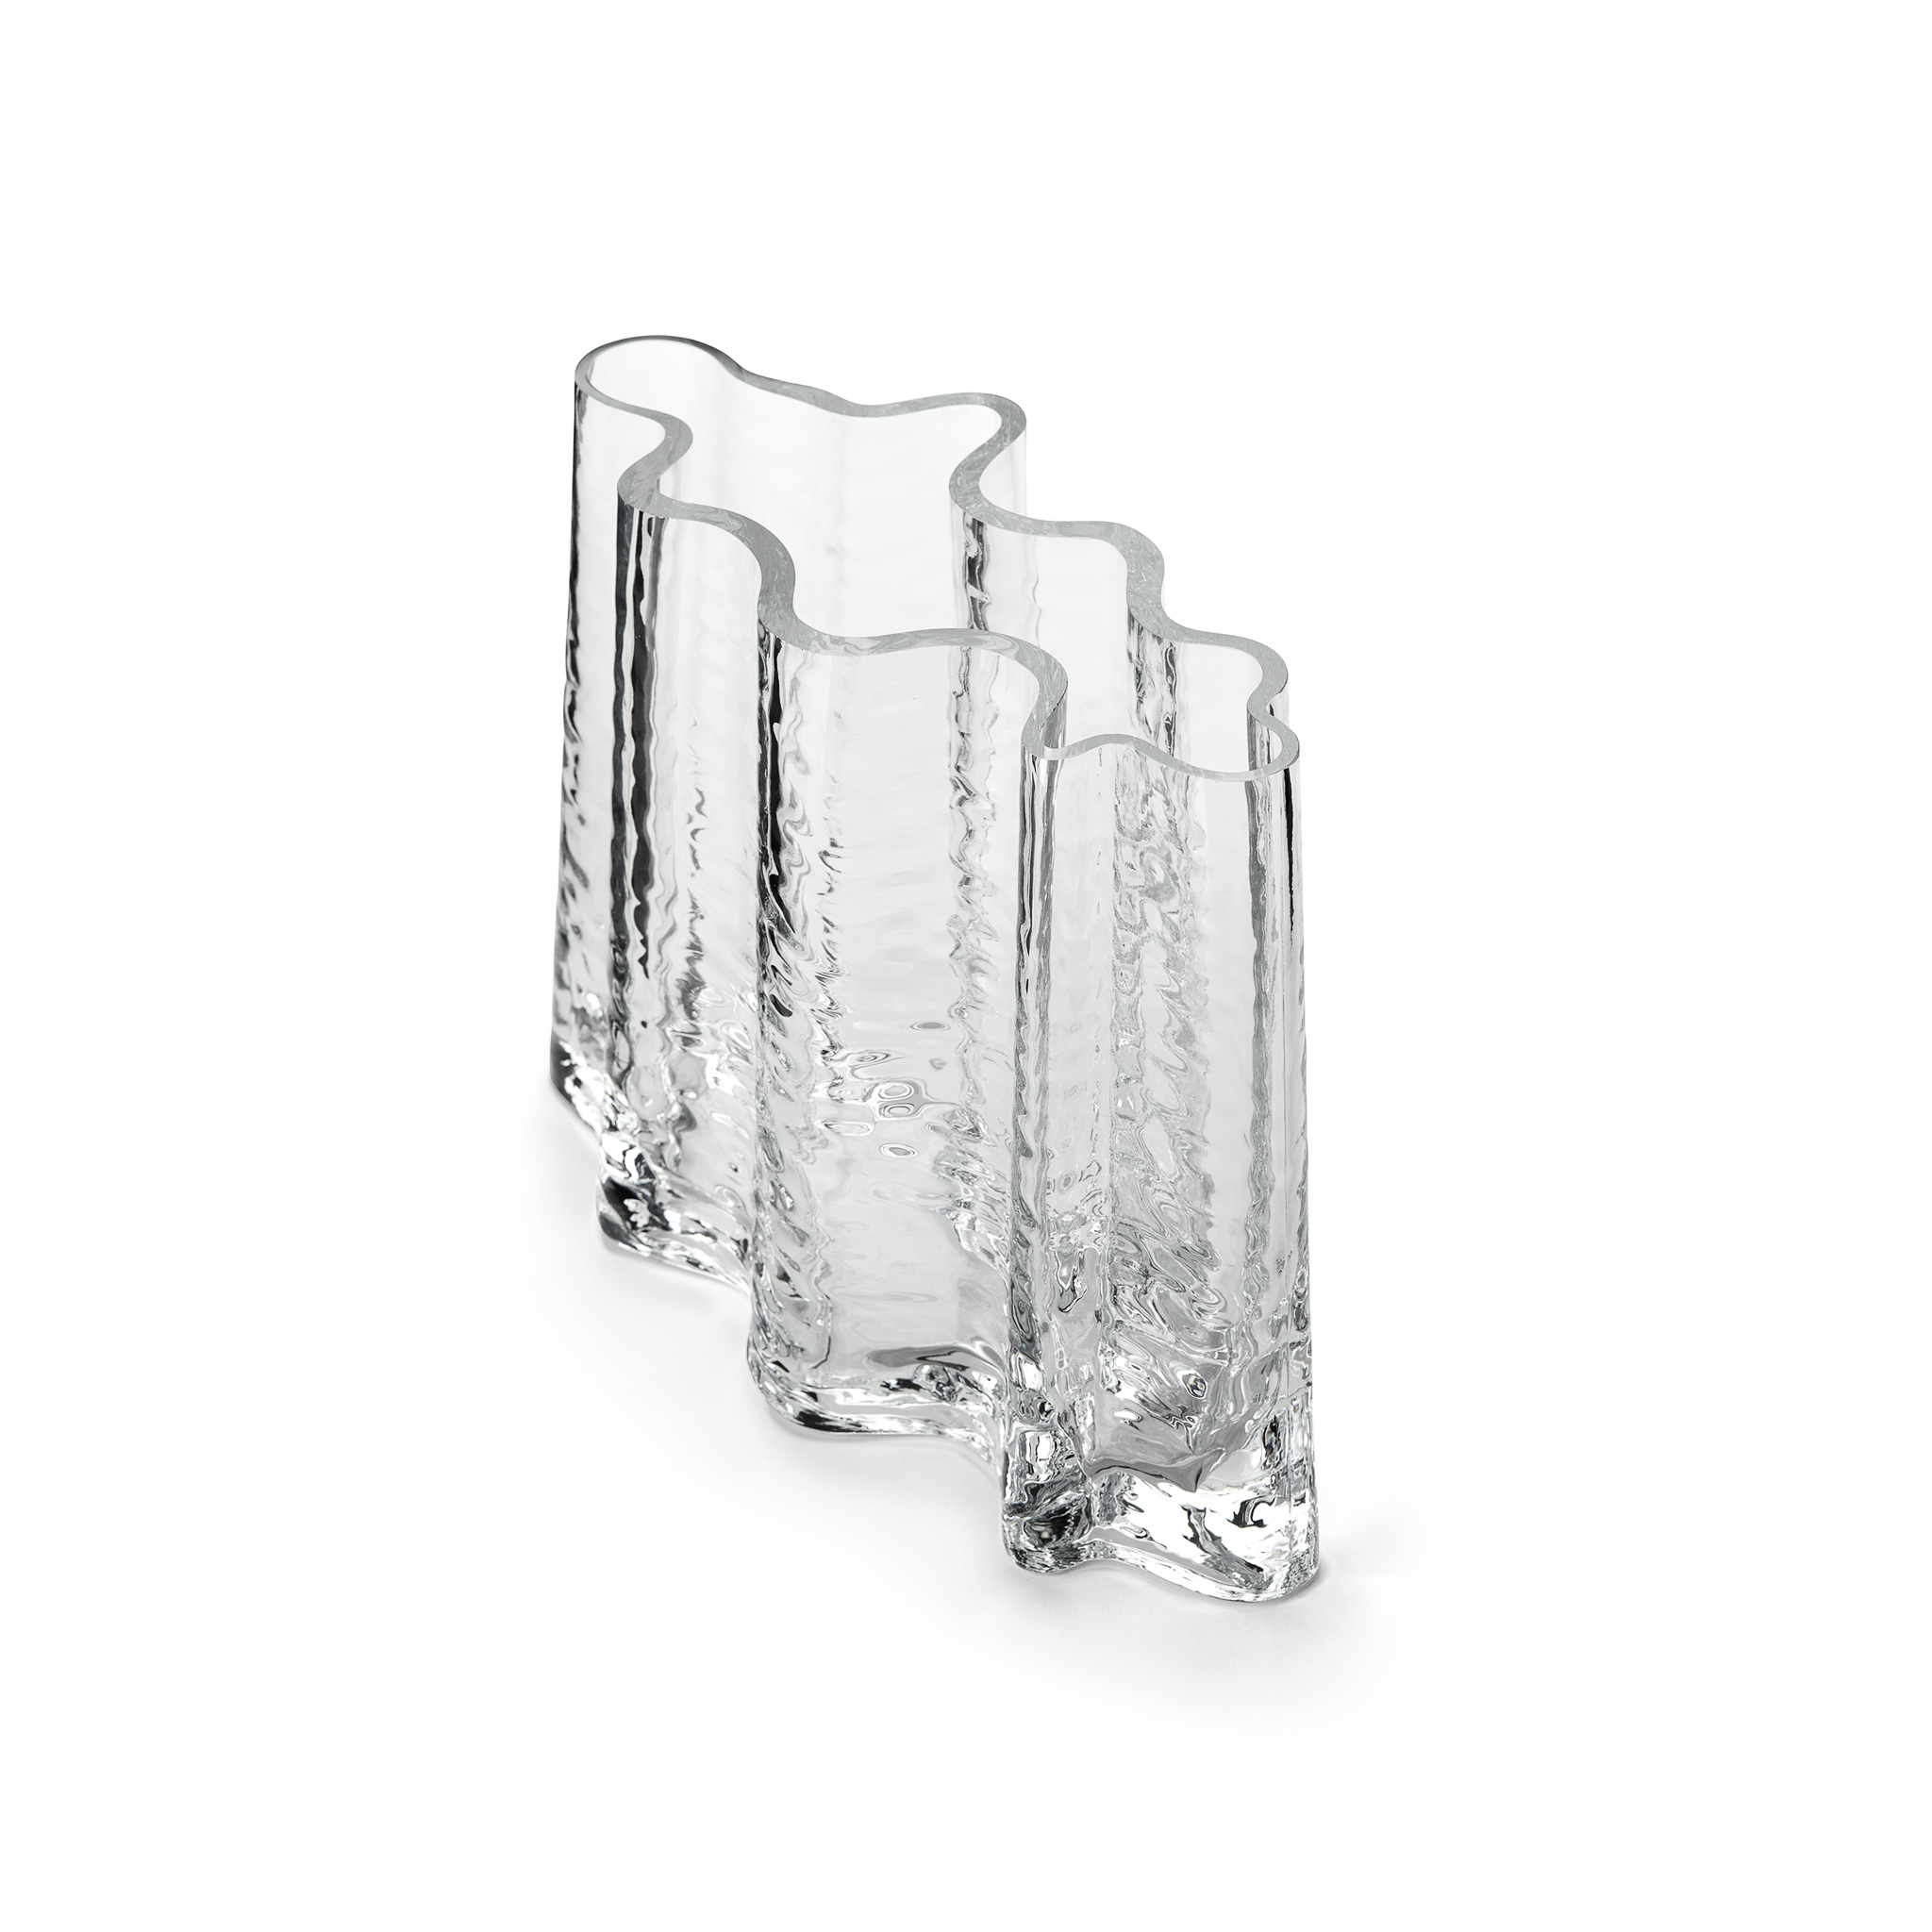 COOEE // GRY WIDE VASE - 24CM | CLEAR